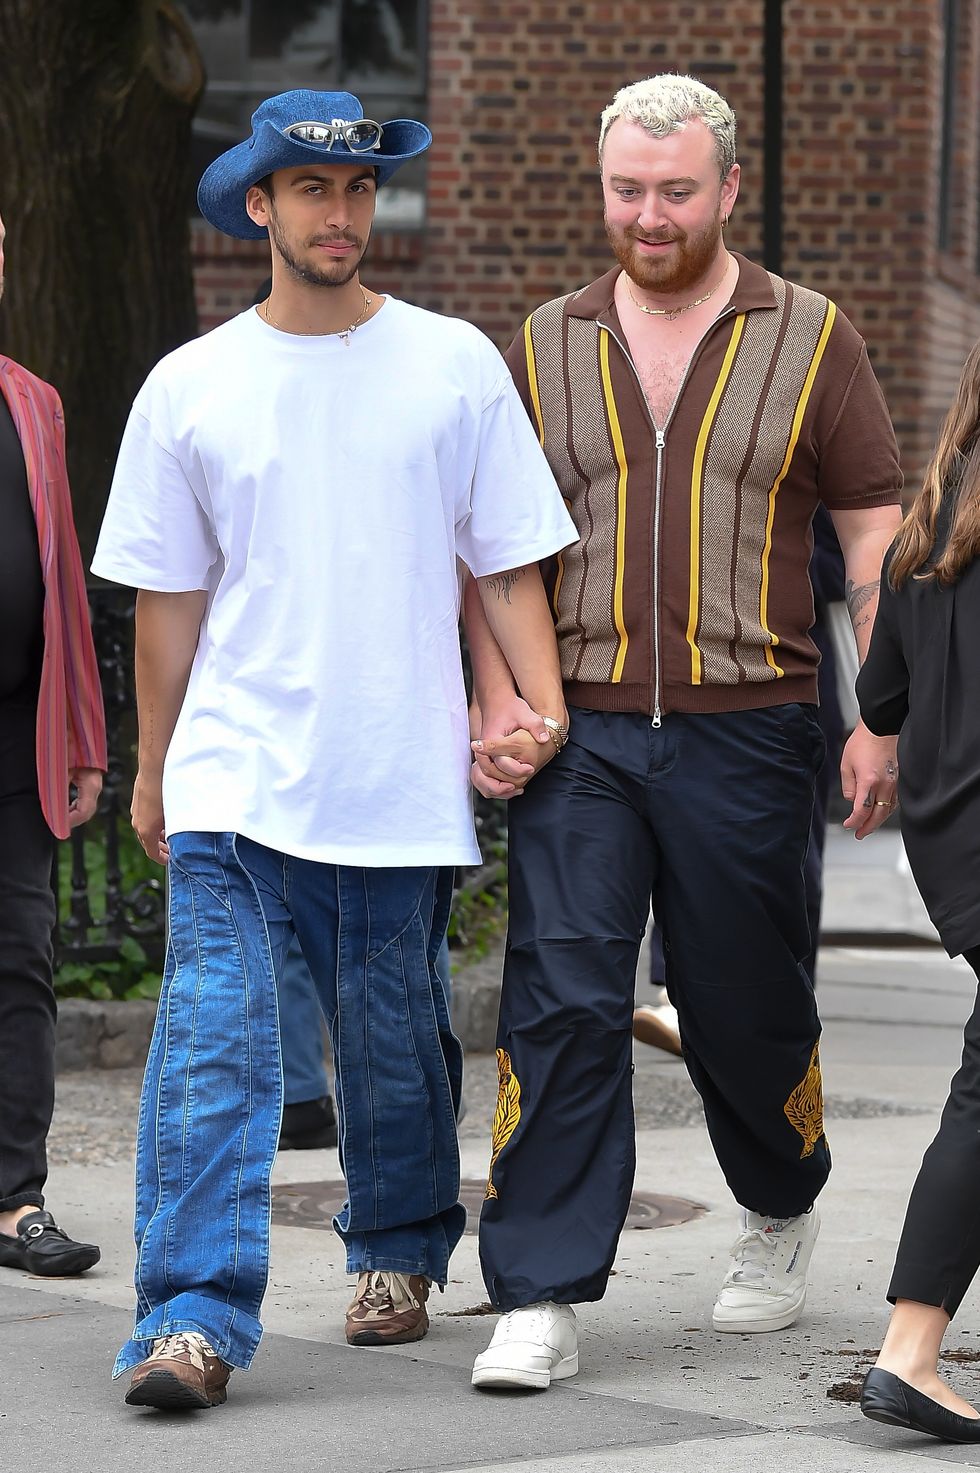 06212023 exclusive sam smith and christian cowan hold hands and keep close during a stroll in new york city the british singer and the fashion designer continue to fuel dating rumors, as they have been spotted getting cozy on multiple occasions salestheimagedirectcom please bylinetheimagedirectcomexclusive please email salestheimagedirectcom for fees before use